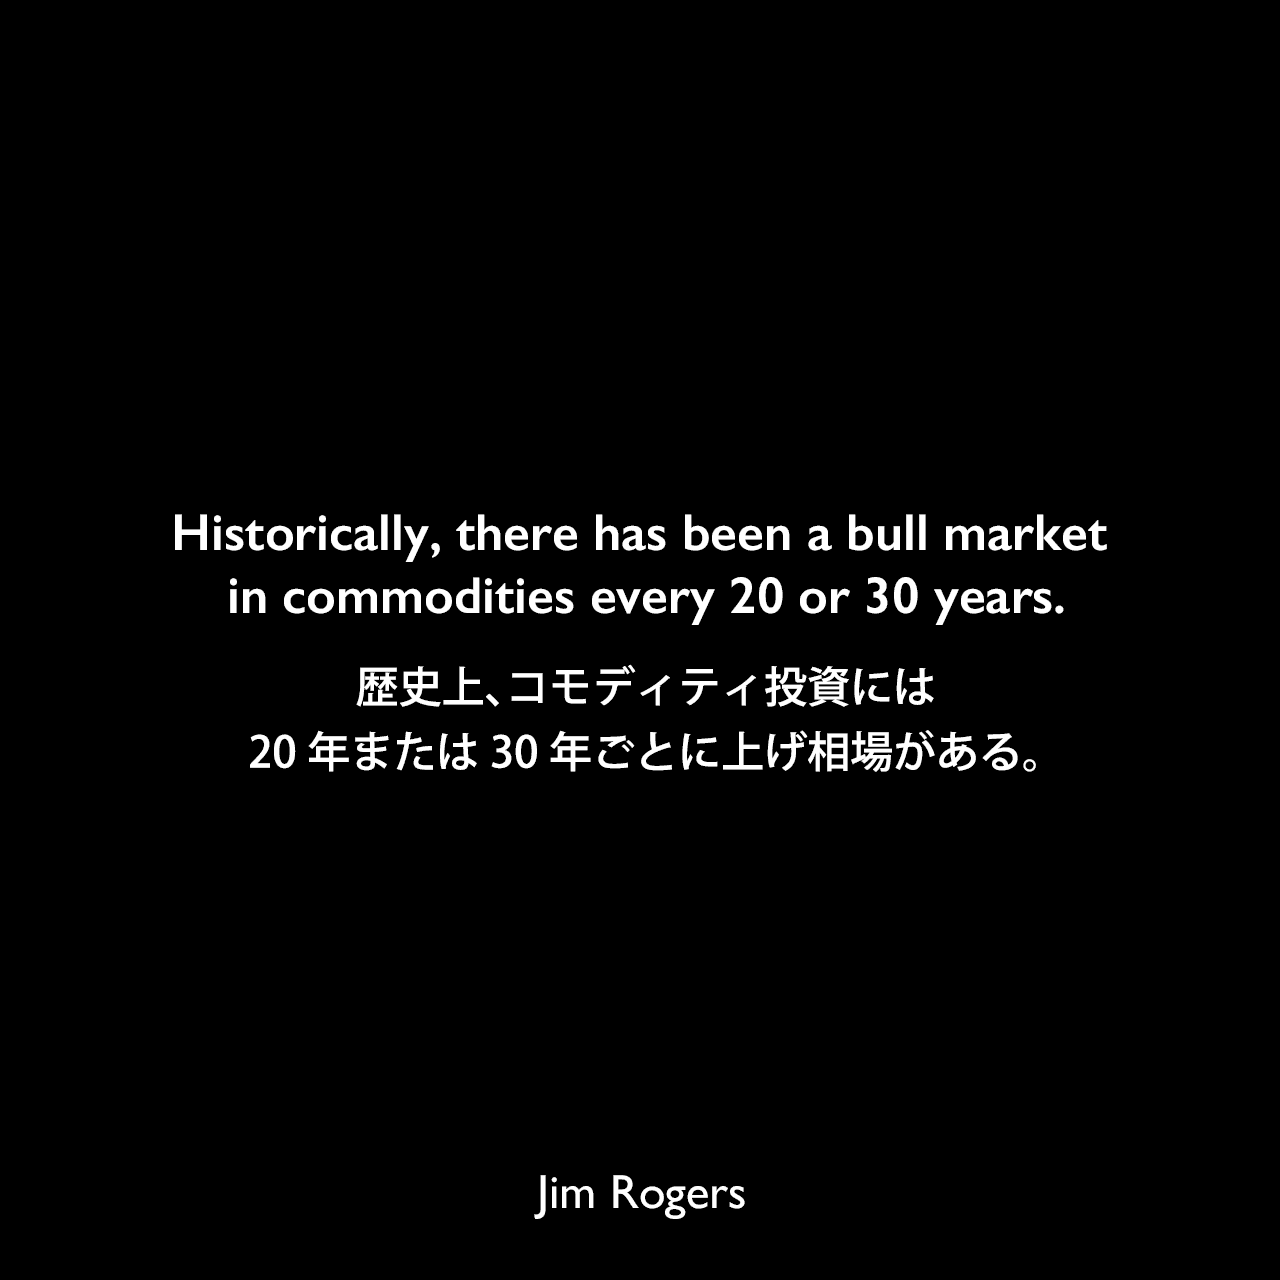 Historically, there has been a bull market in commodities every 20 or 30 years.歴史上、コモディティ投資には、20年または30年ごとに上げ相場がある。Jim Rogers